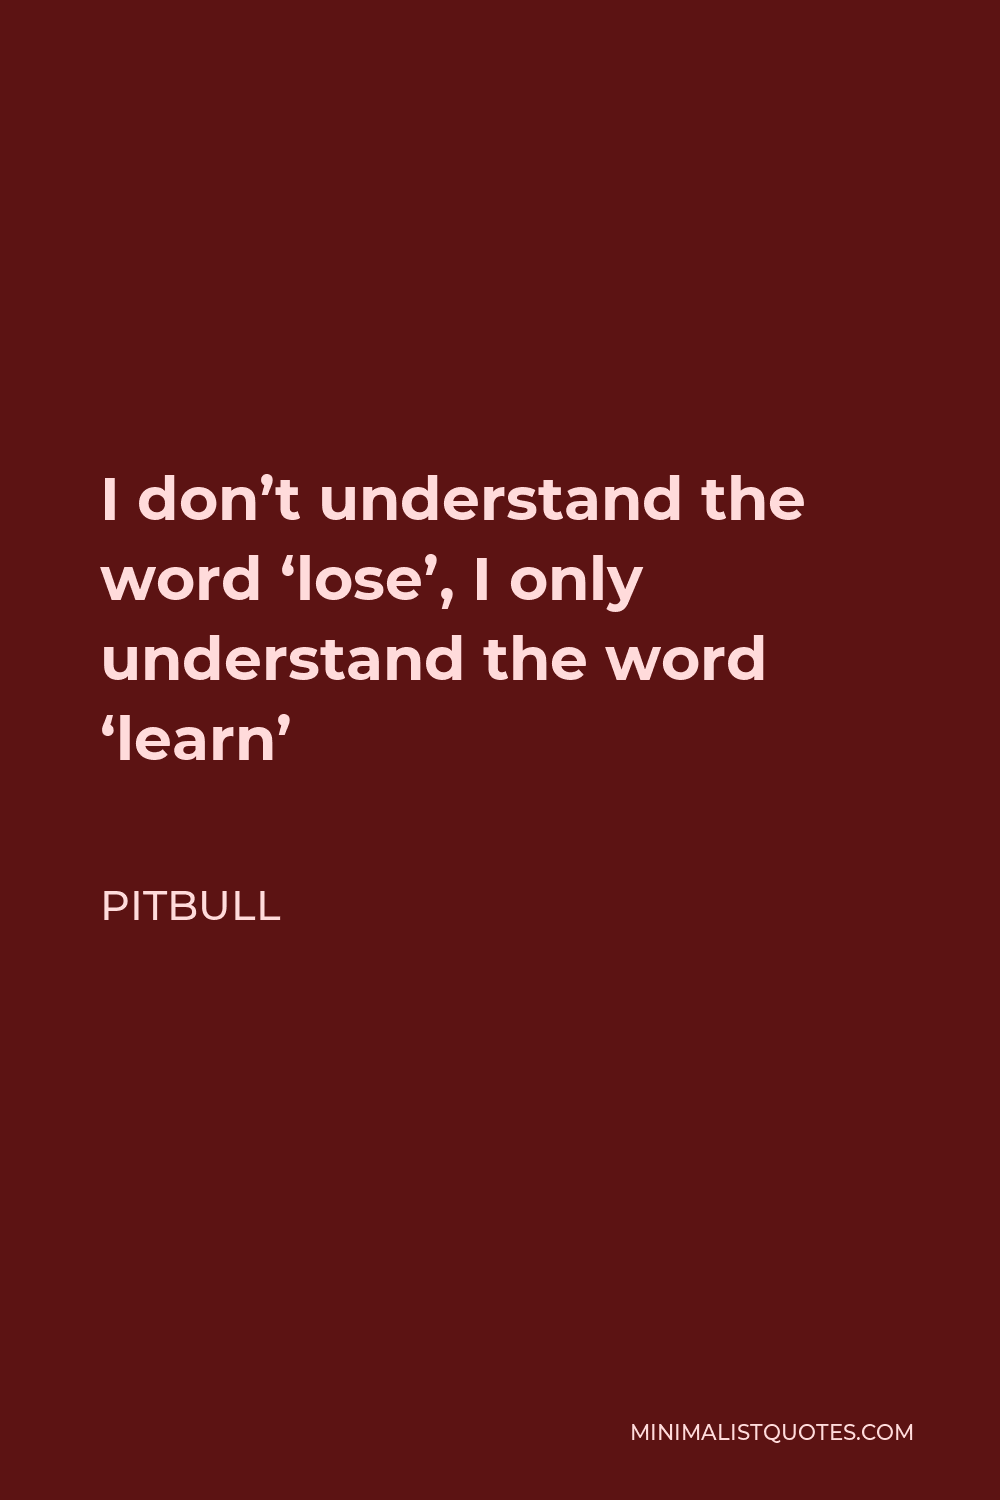 Pitbull Quote - I don’t understand the word ‘lose’, I only understand the word ‘learn’